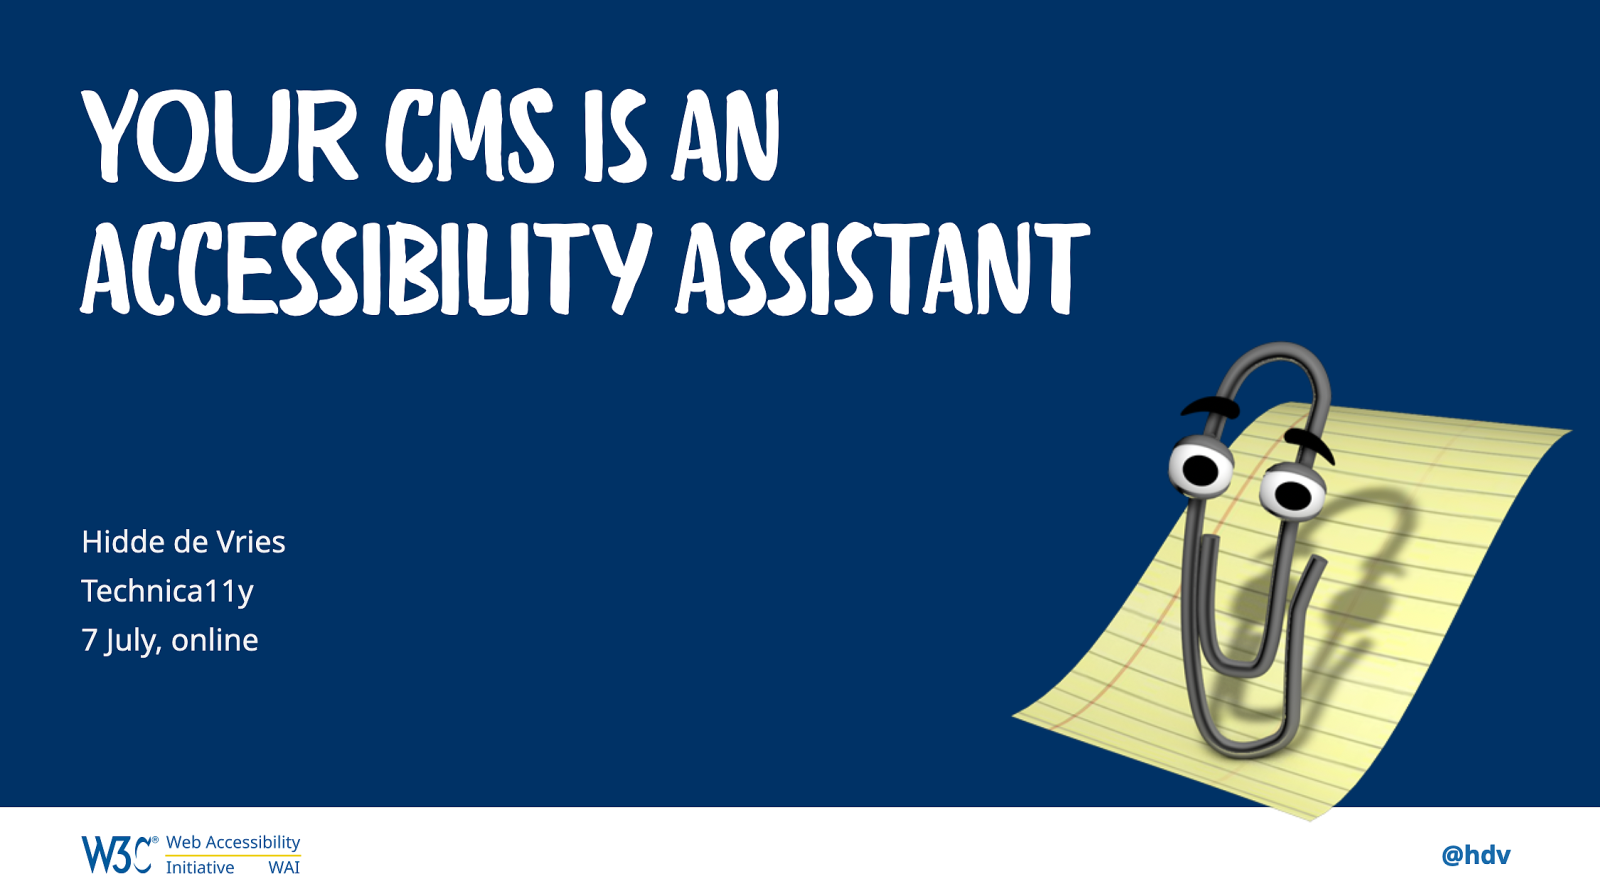 Your CMS is an accessibility assistant